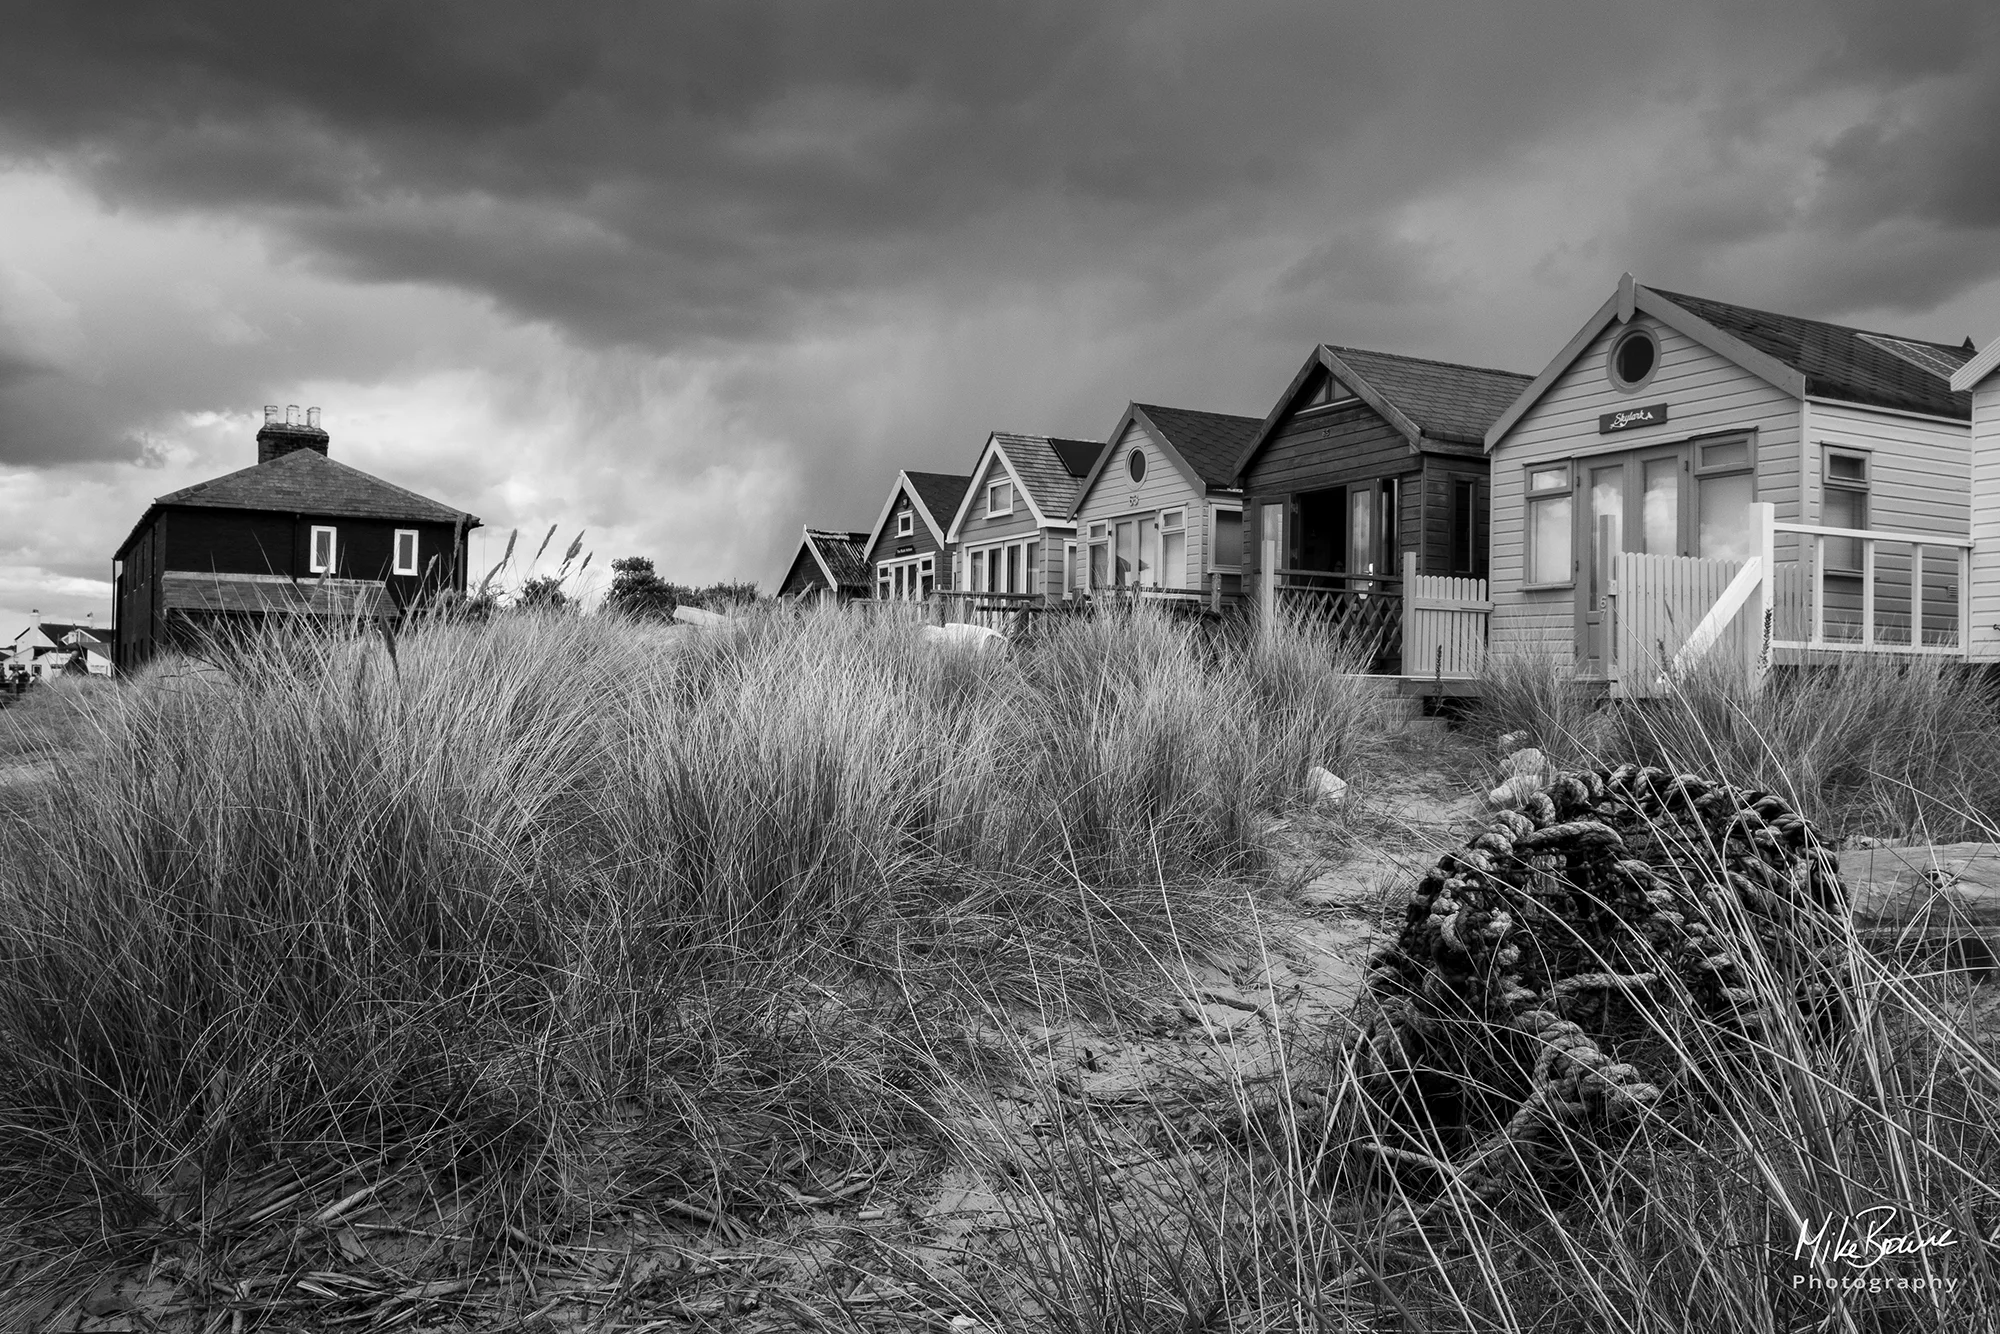 Lobster pot and grasses in front of beach huts with storm clouds in sky